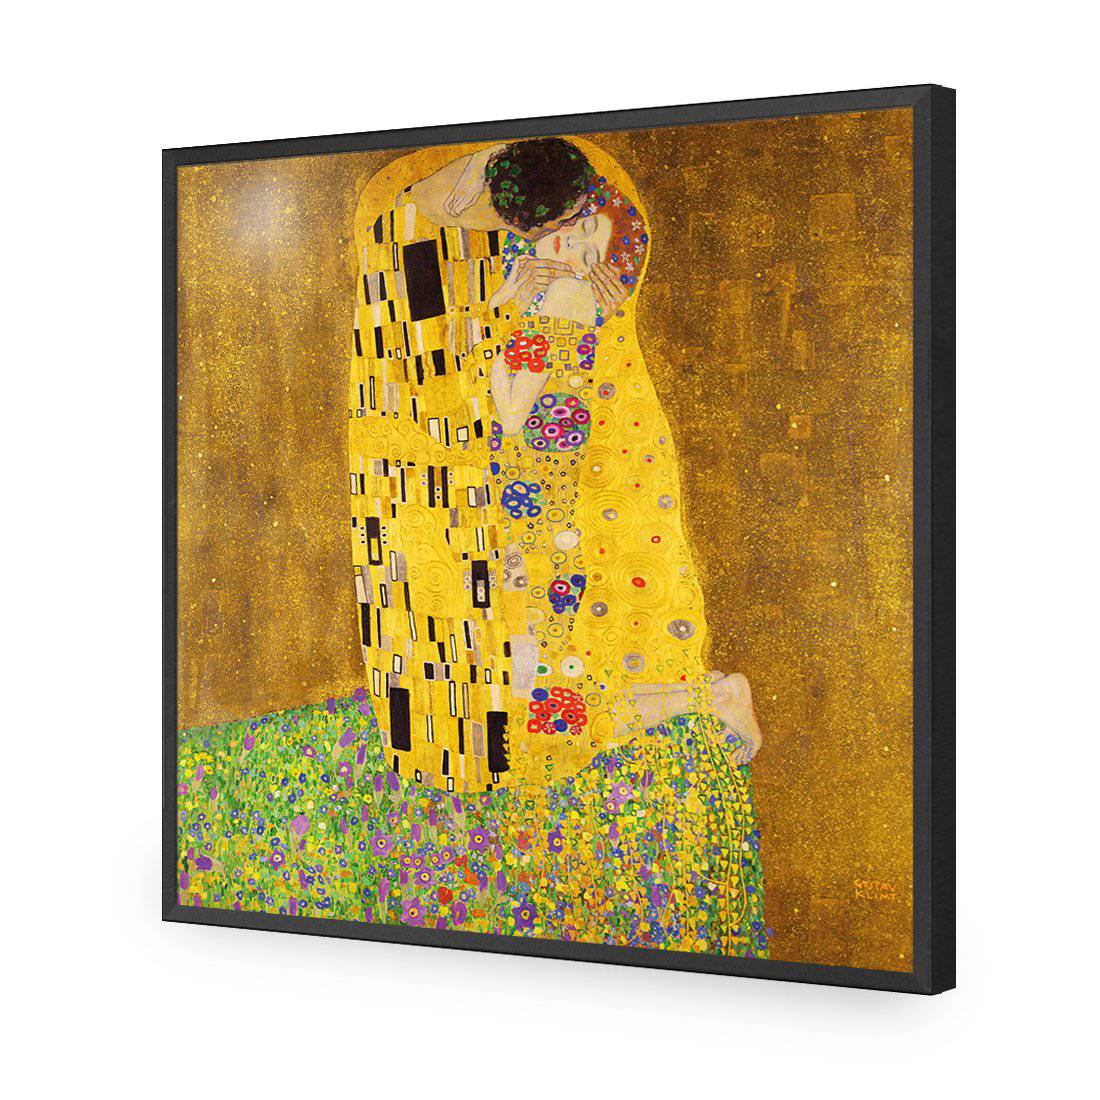 The Kiss, Square-Acrylic-Wall Art Design-Without Border-Acrylic - Black Frame-37x37cm-Wall Art Designs